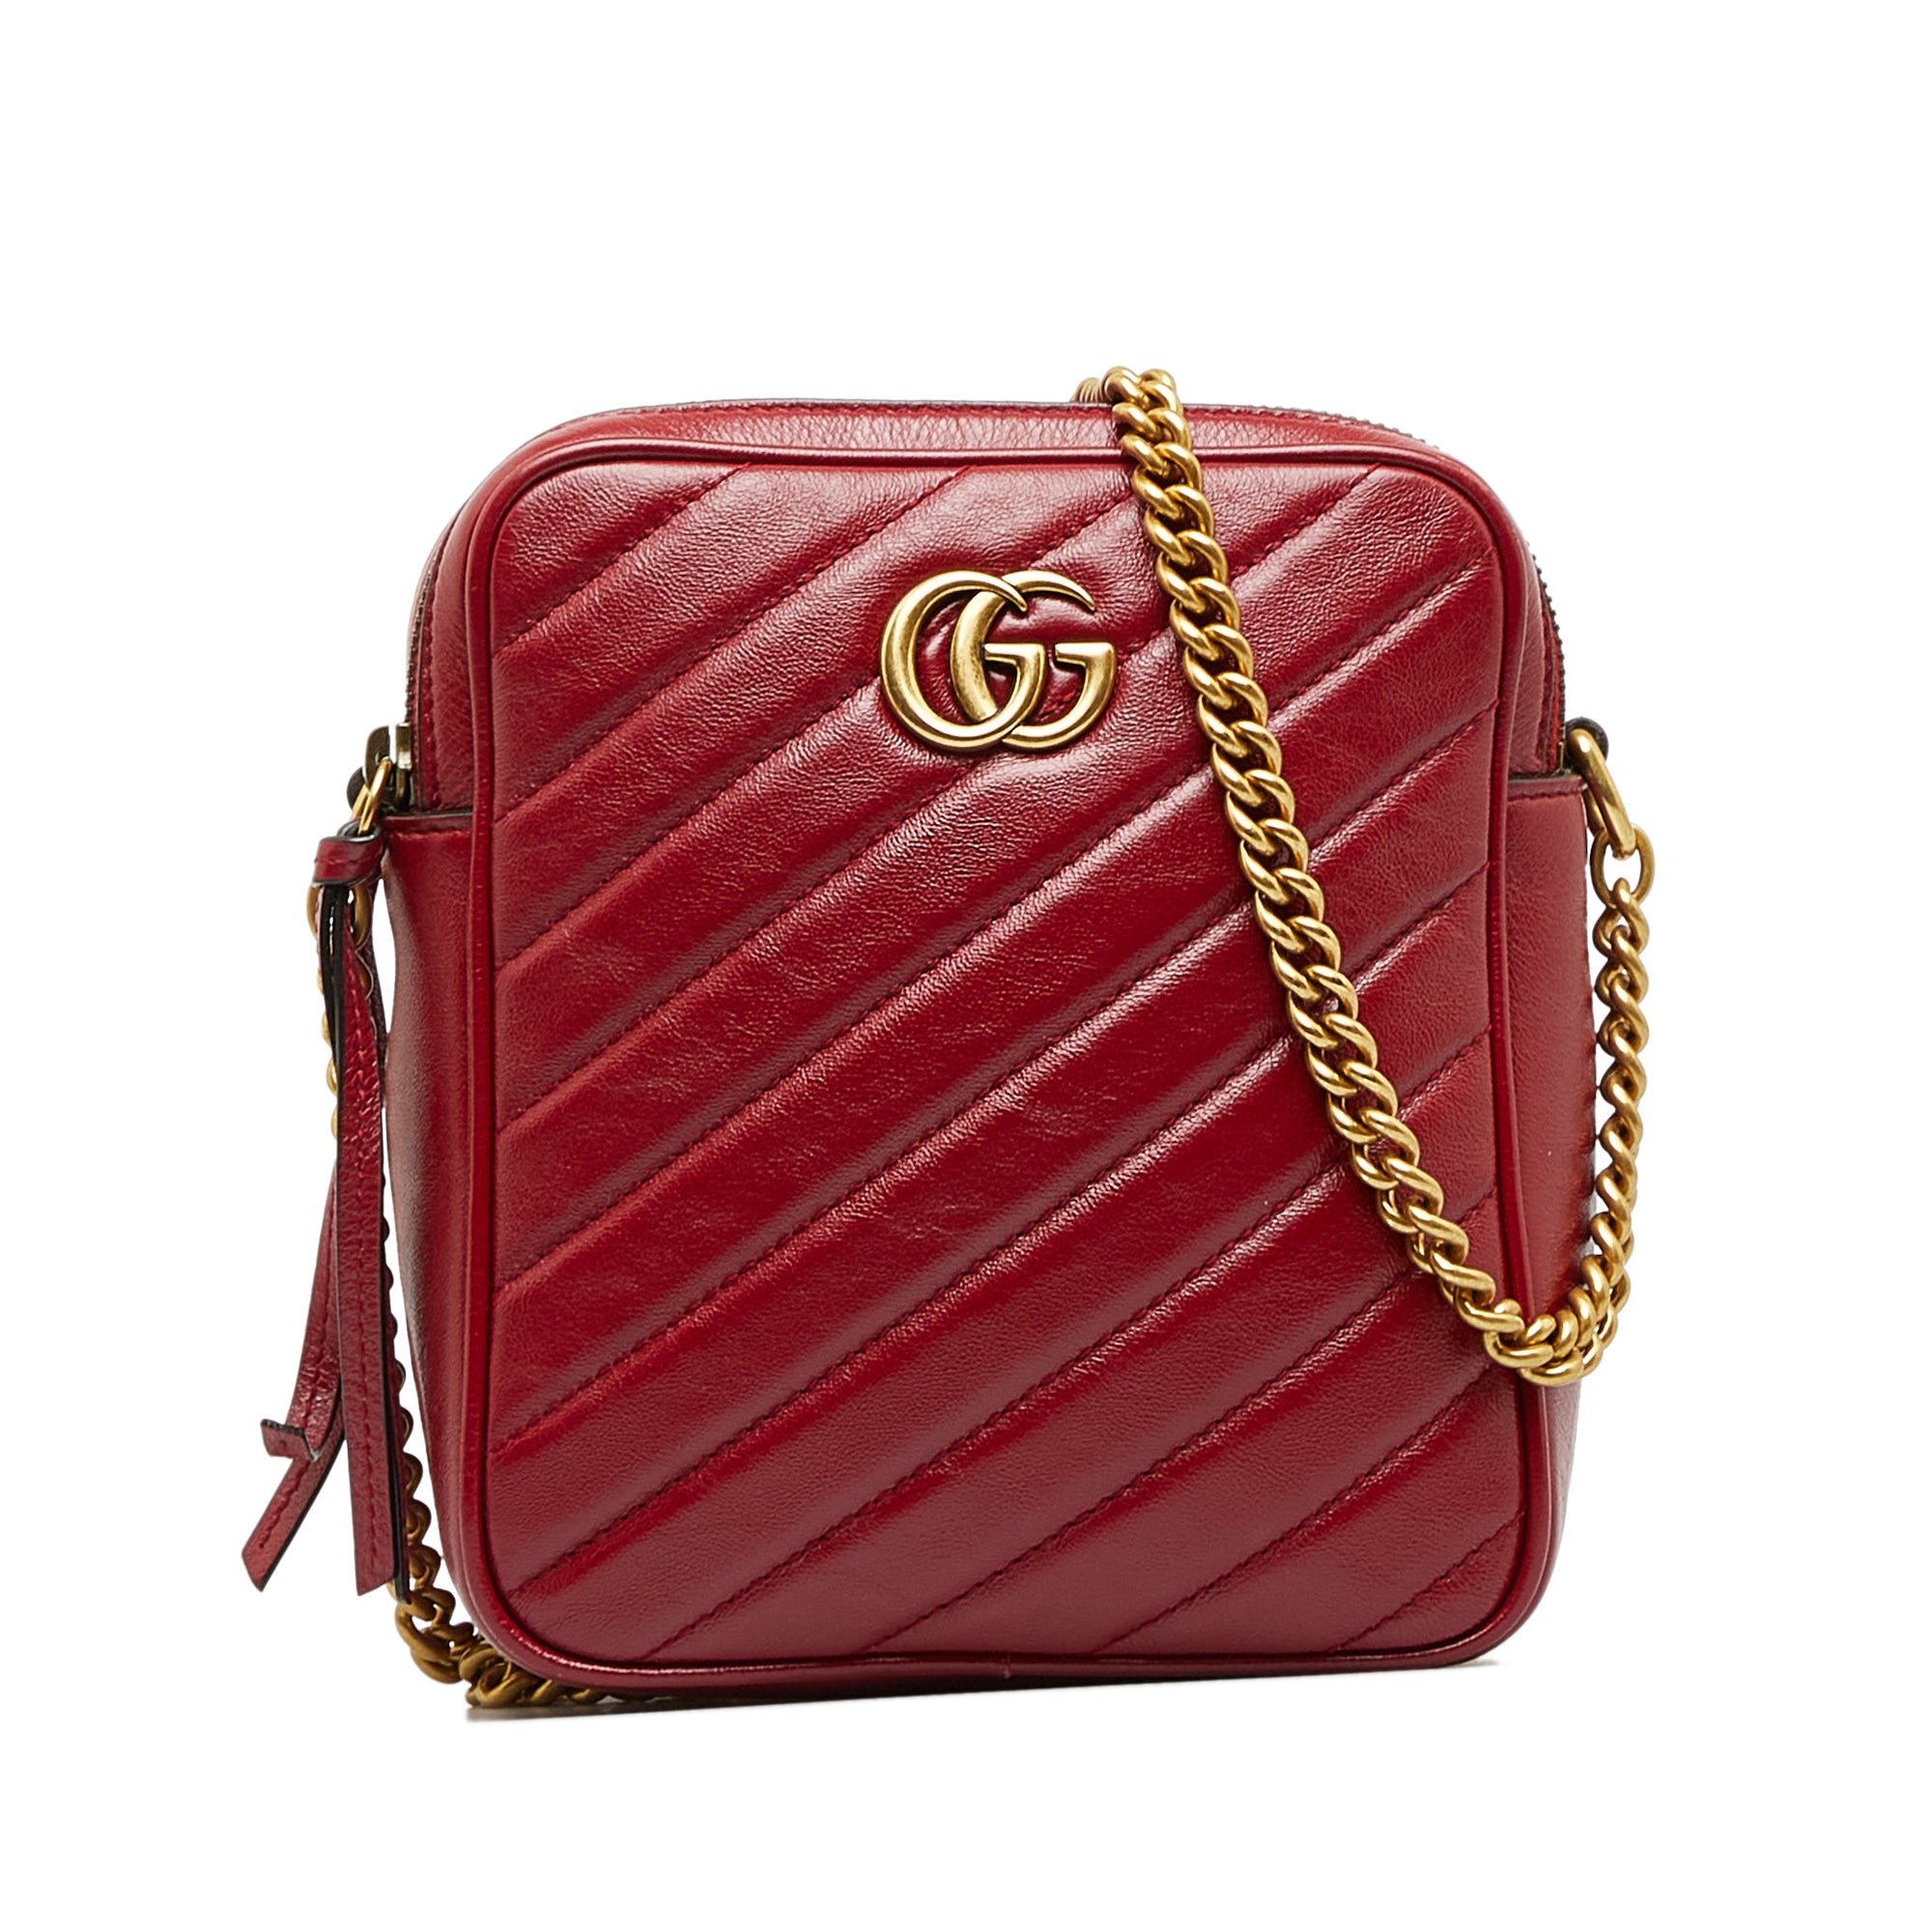 Gucci Marmont Shoulder Bag Red Bags & Handbags for Women for sale